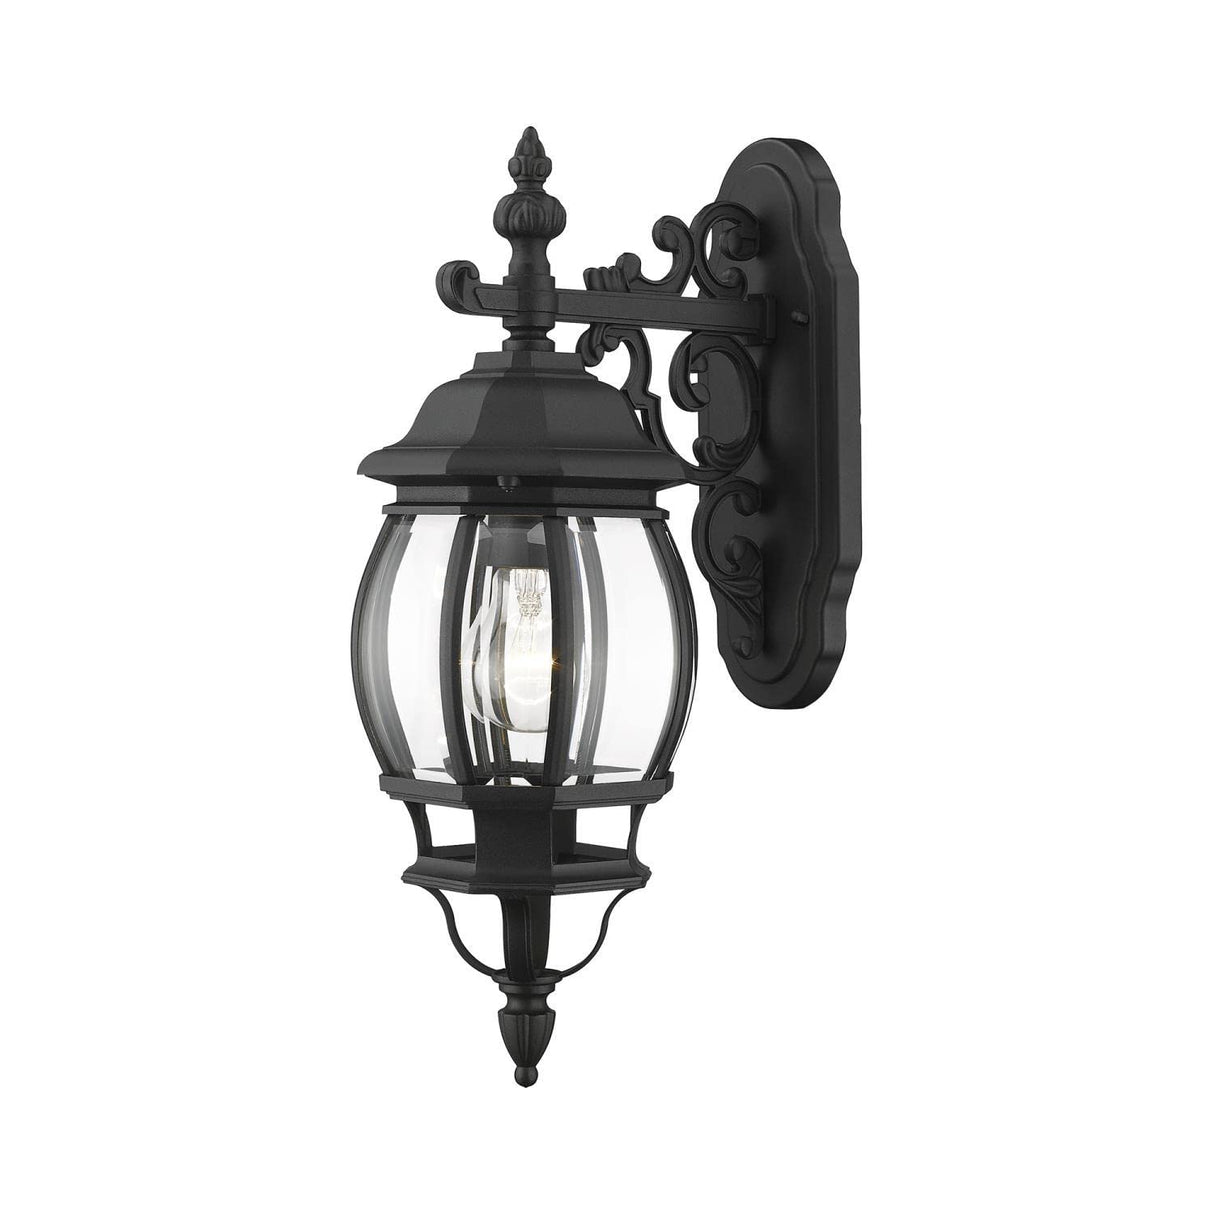 Livex Lighting 7706-14 Frontenac 1-Light Outdoor Wall Lantern with Clear Beveled Glass Shades, 20" x 6.5", Black